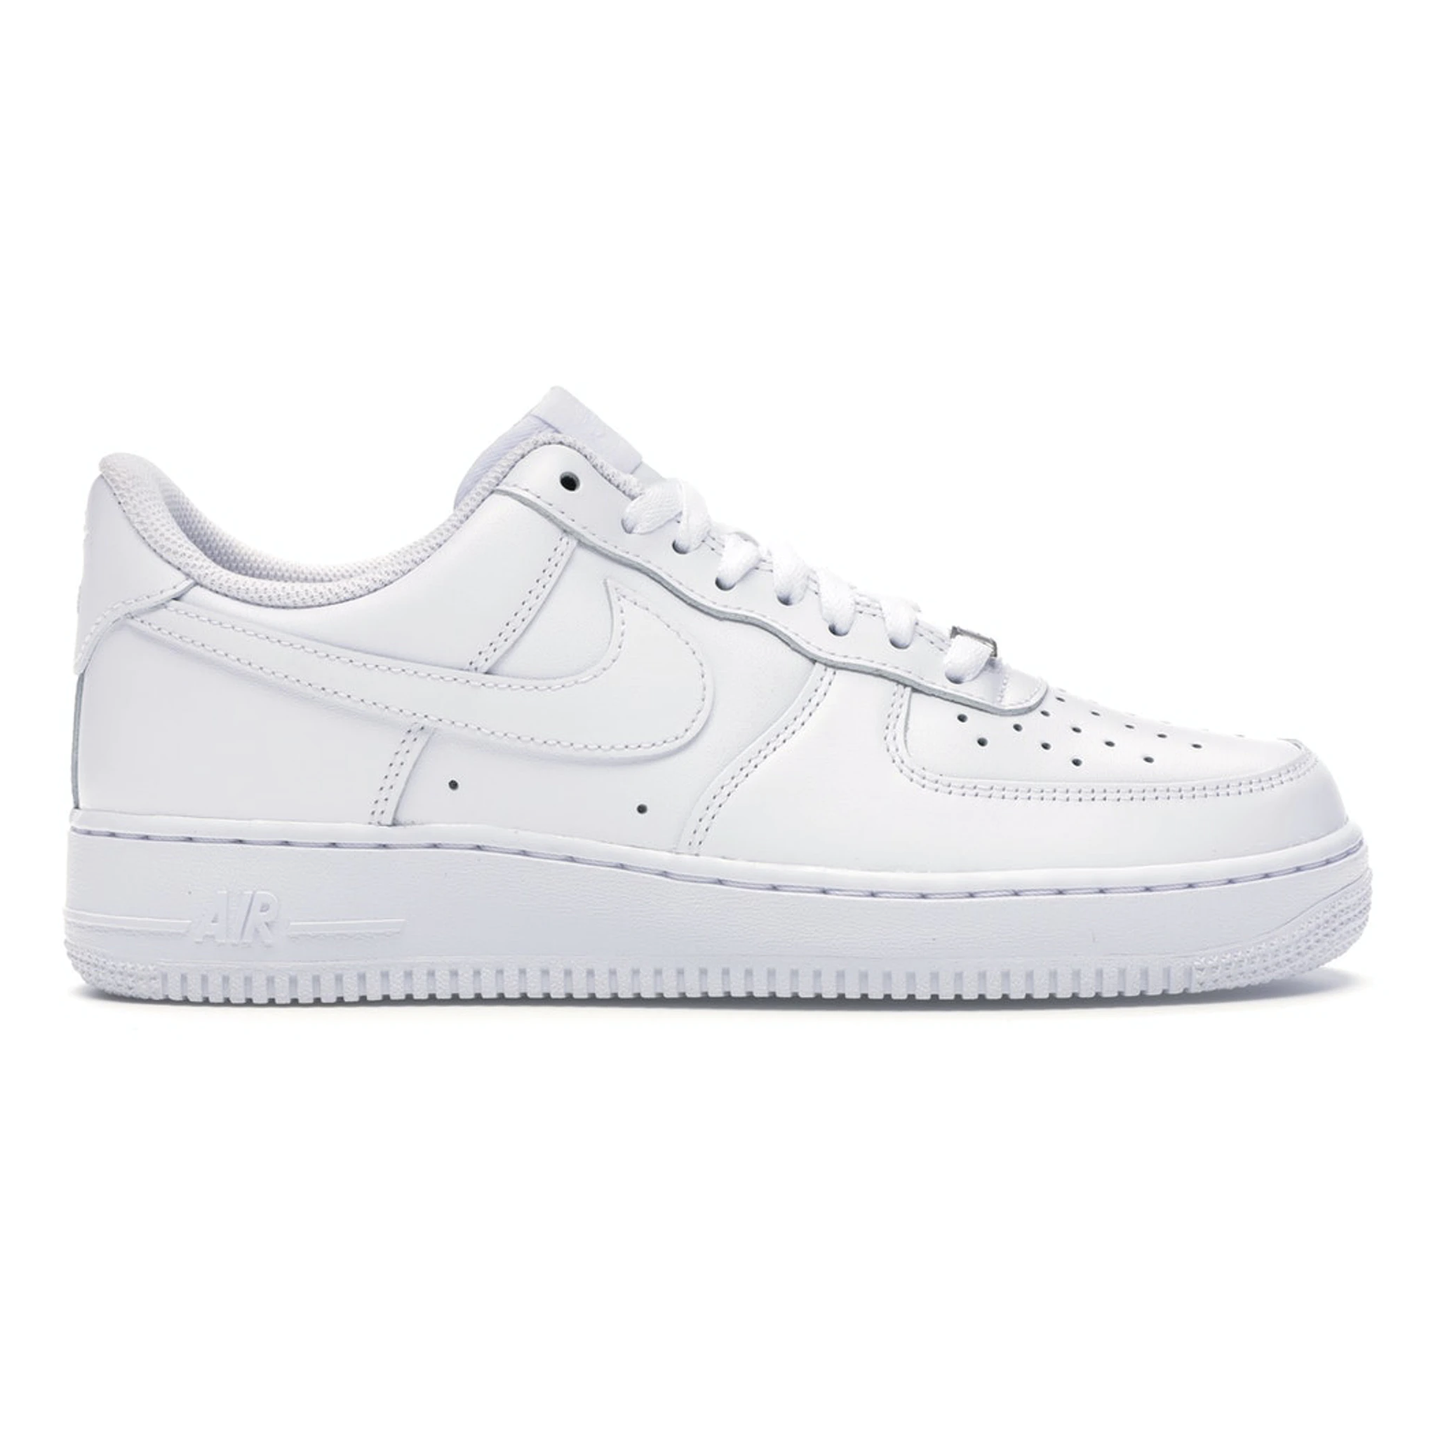 Nike Air Force 1 Low '07 - White